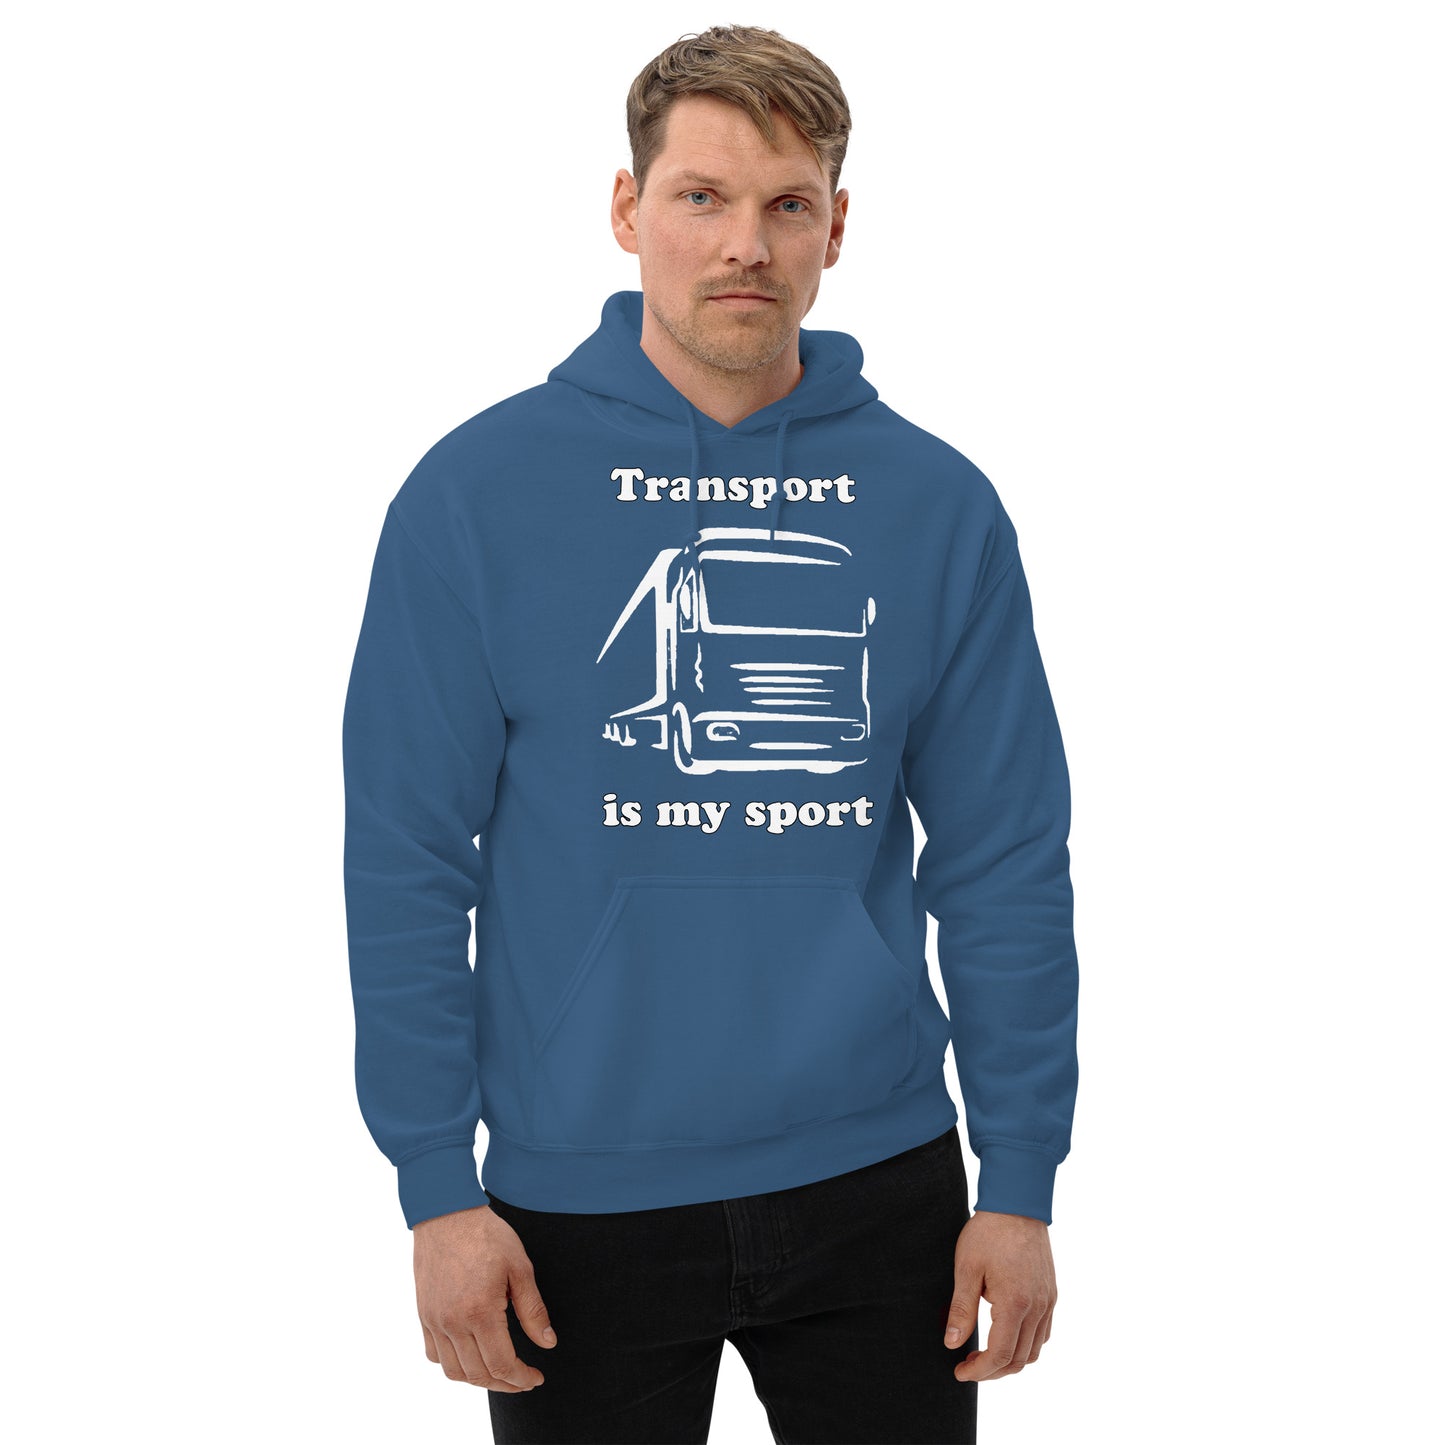 Man with indigo blue hoodie with picture of truck and text "Transport is my sport"